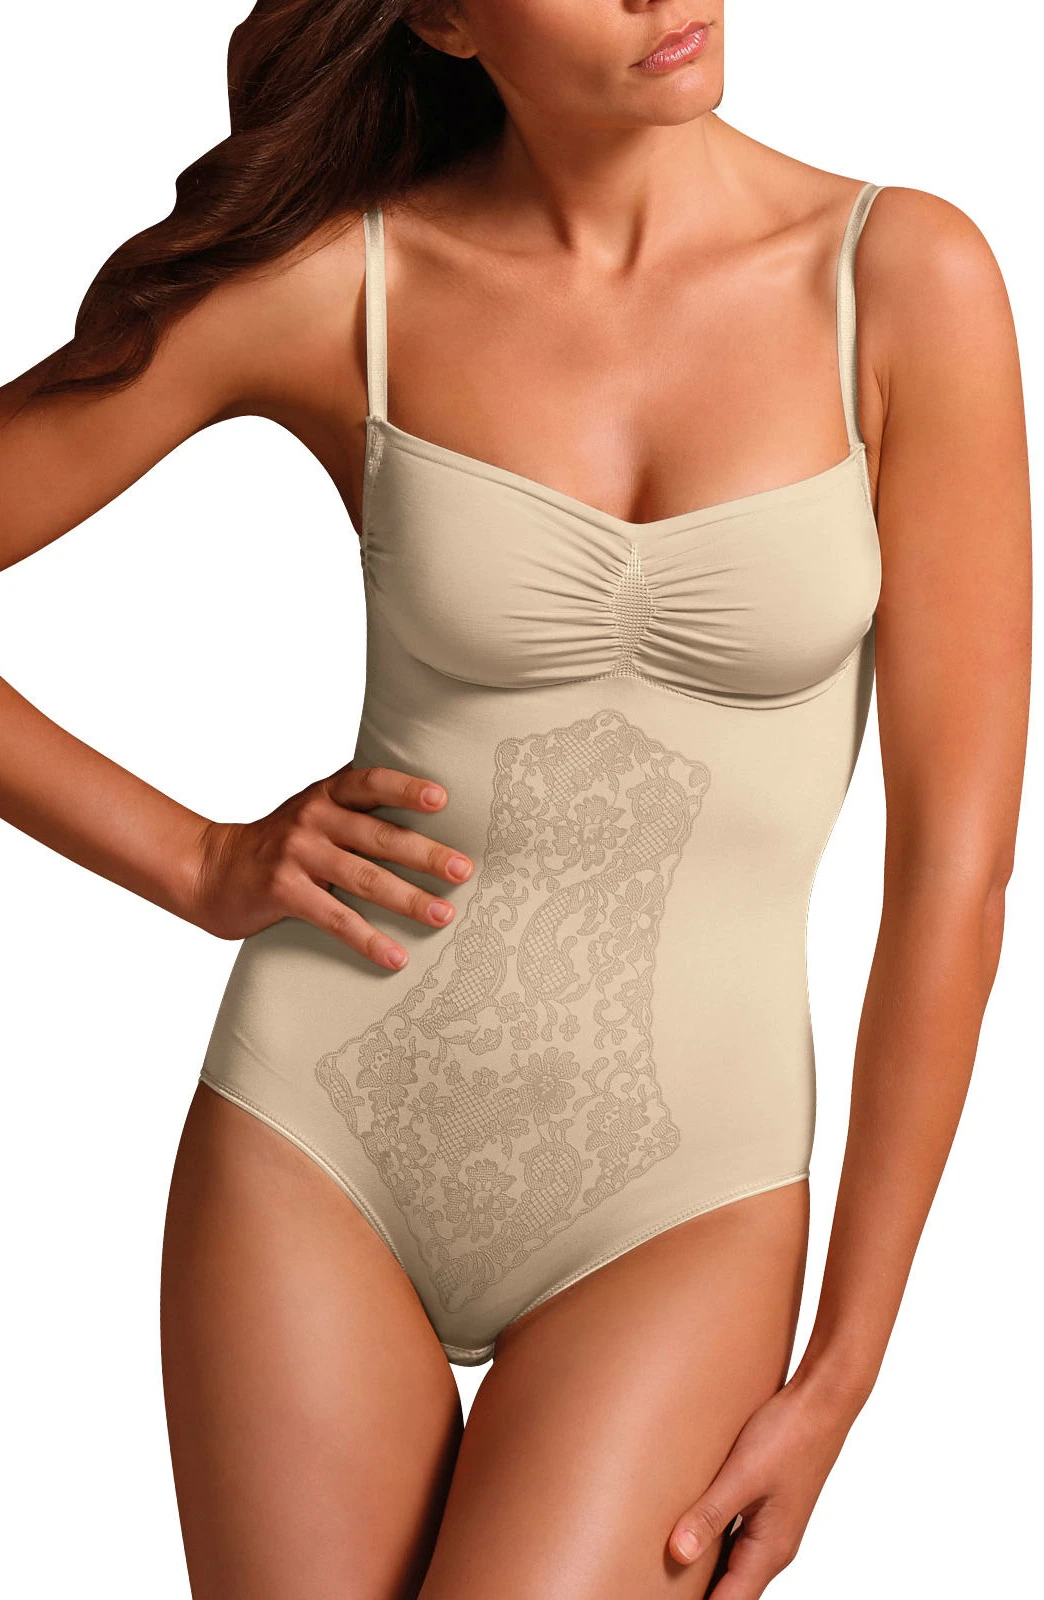 Control Body 510193 Strap Body Shaper - Smooths Silhouette